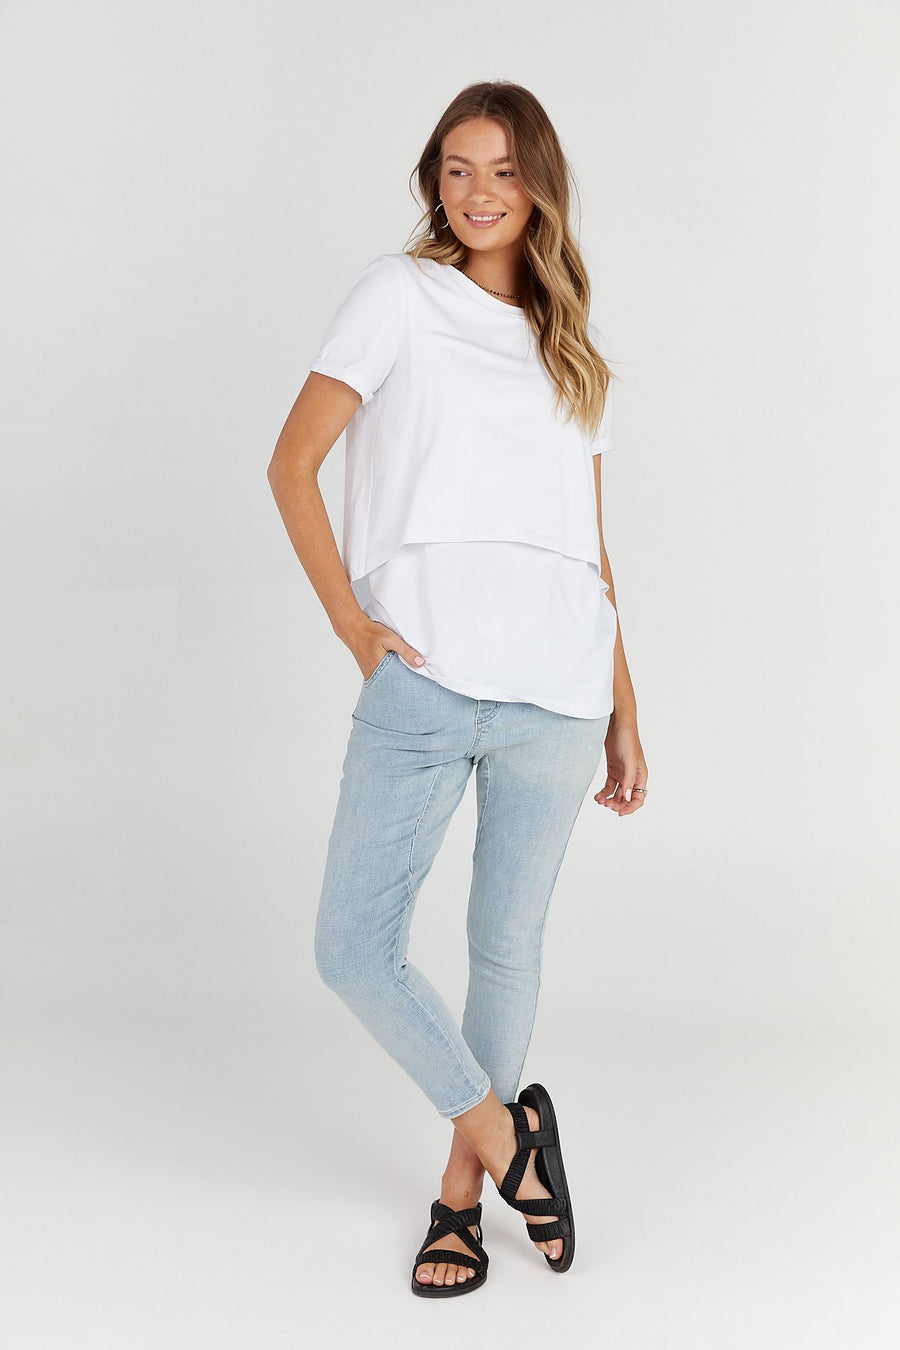 Maternity and Nursing Top White - 4